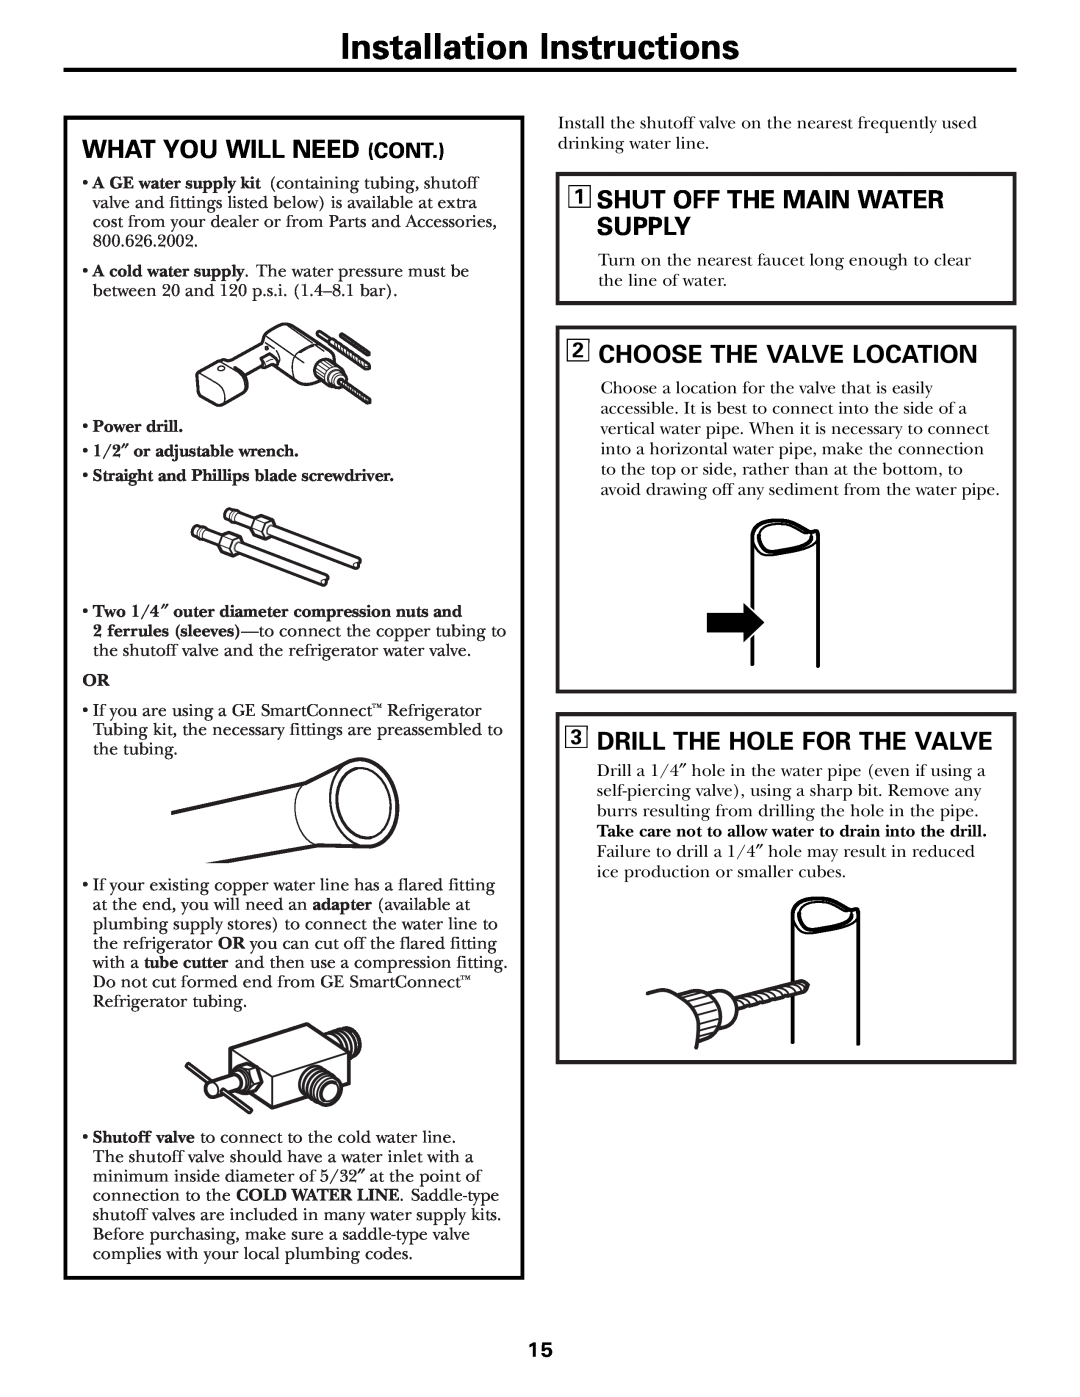 Hotpoint 19 Installation Instructions, What You Will Need Cont, Shut Off The Main Water Supply, Choose The Valve Location 